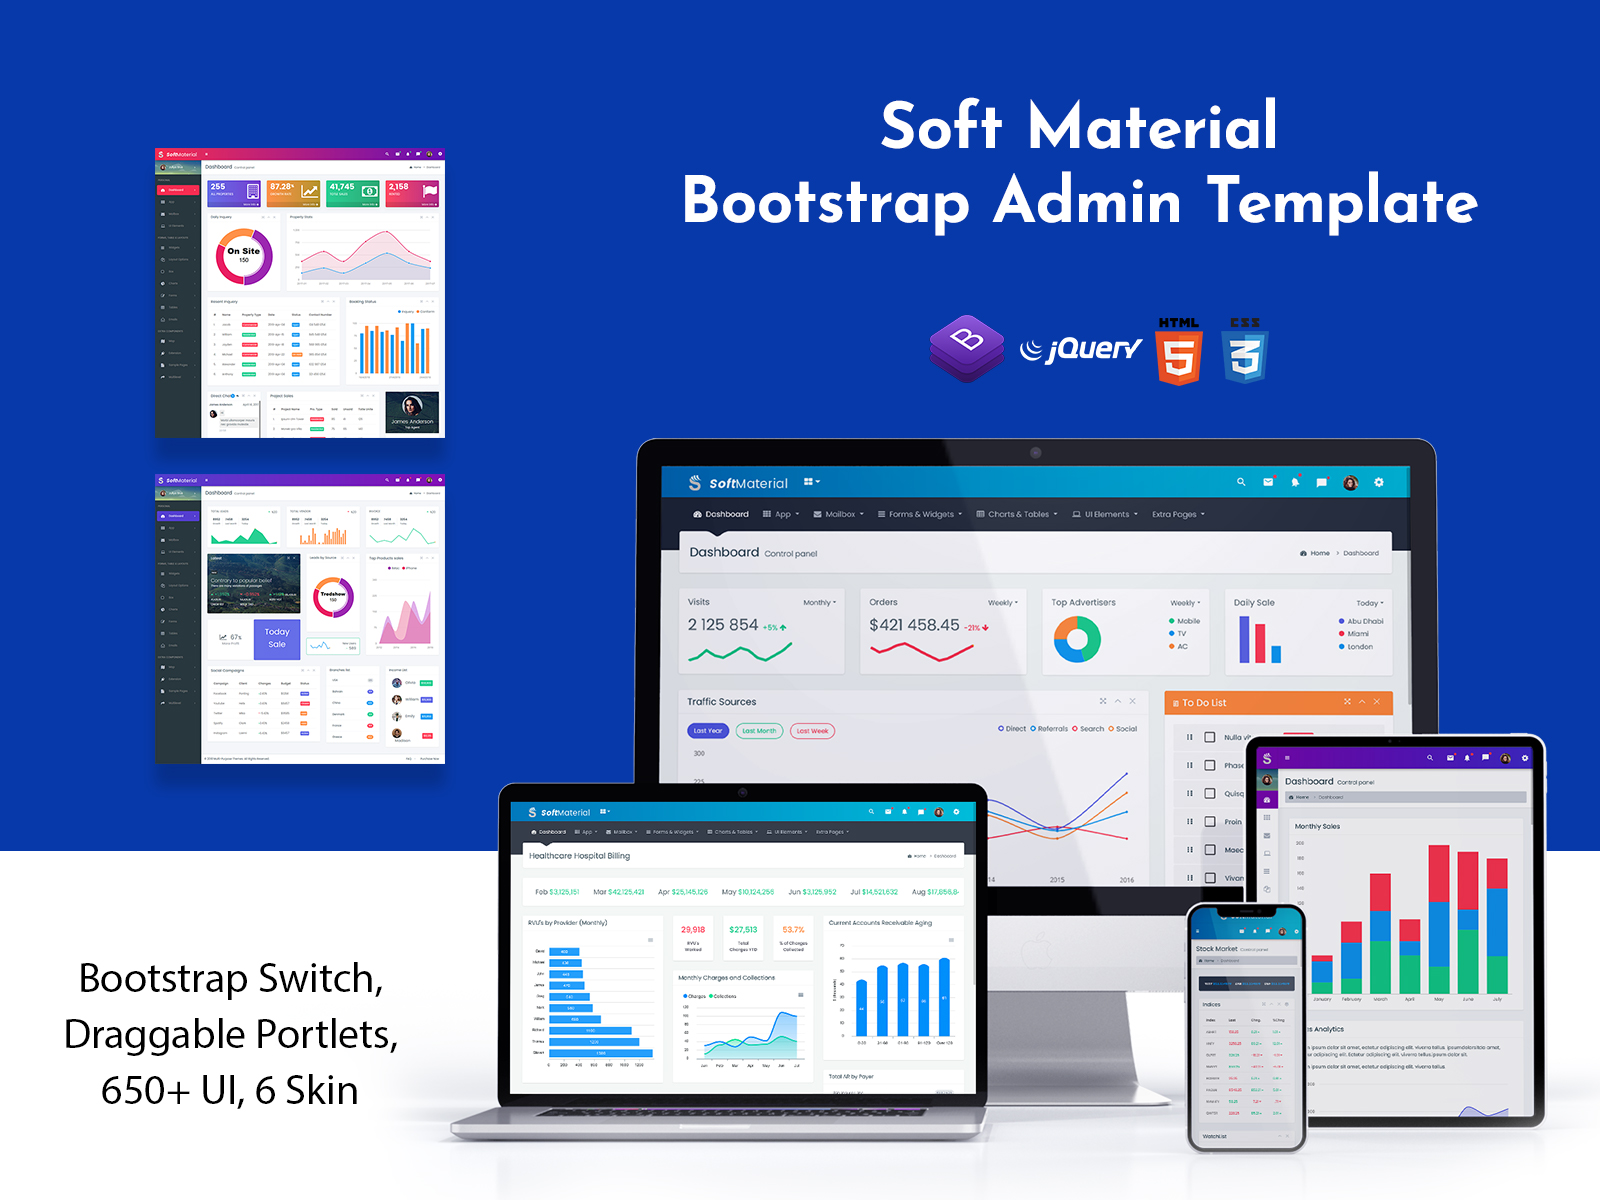 Soft Material Bootstrap Admin Template (14)